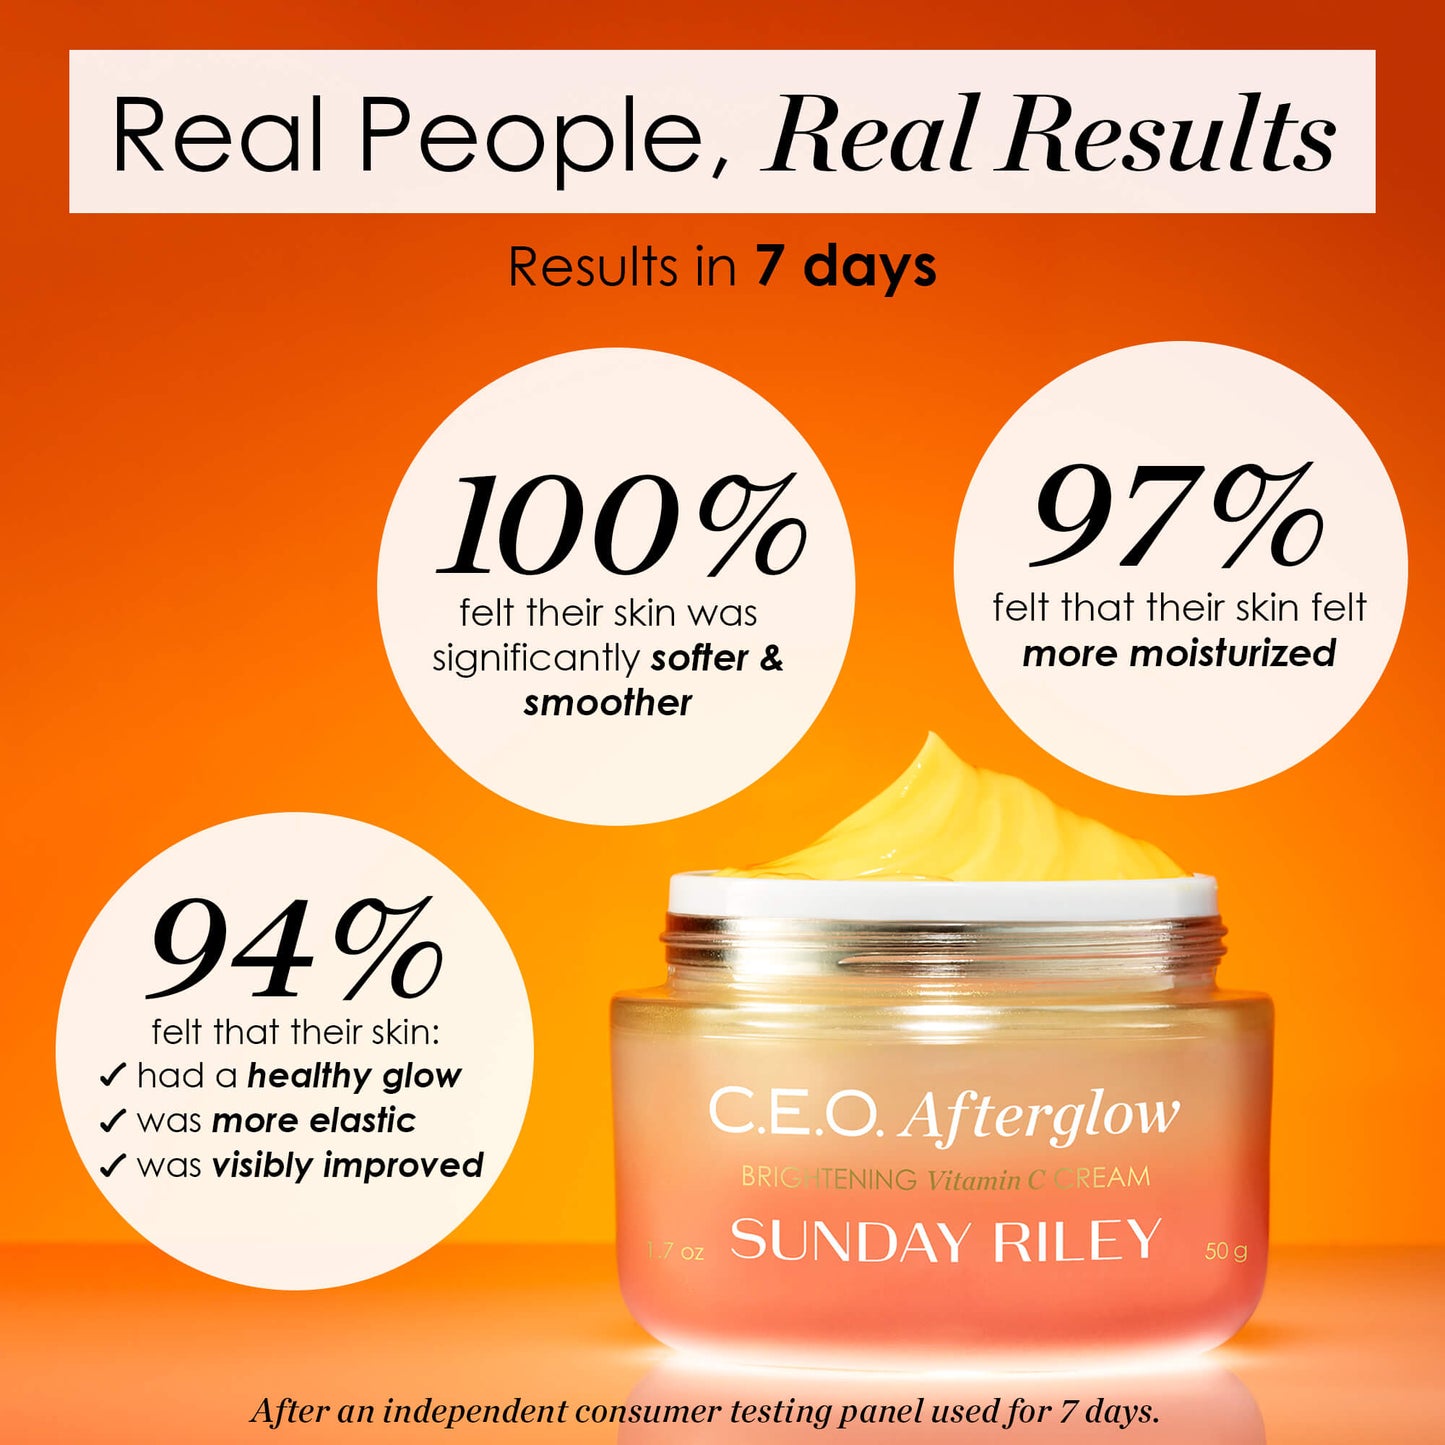 Infographic of C.E.O. Afterglow Brightening Vitamin C Cream saying in 7 days, 94% felt that their skin: had a healthy glow, was more elastic, and was visibly. 100% felt their skin was significantly softer & smoother. 97% felt that their skin felt more moisturized